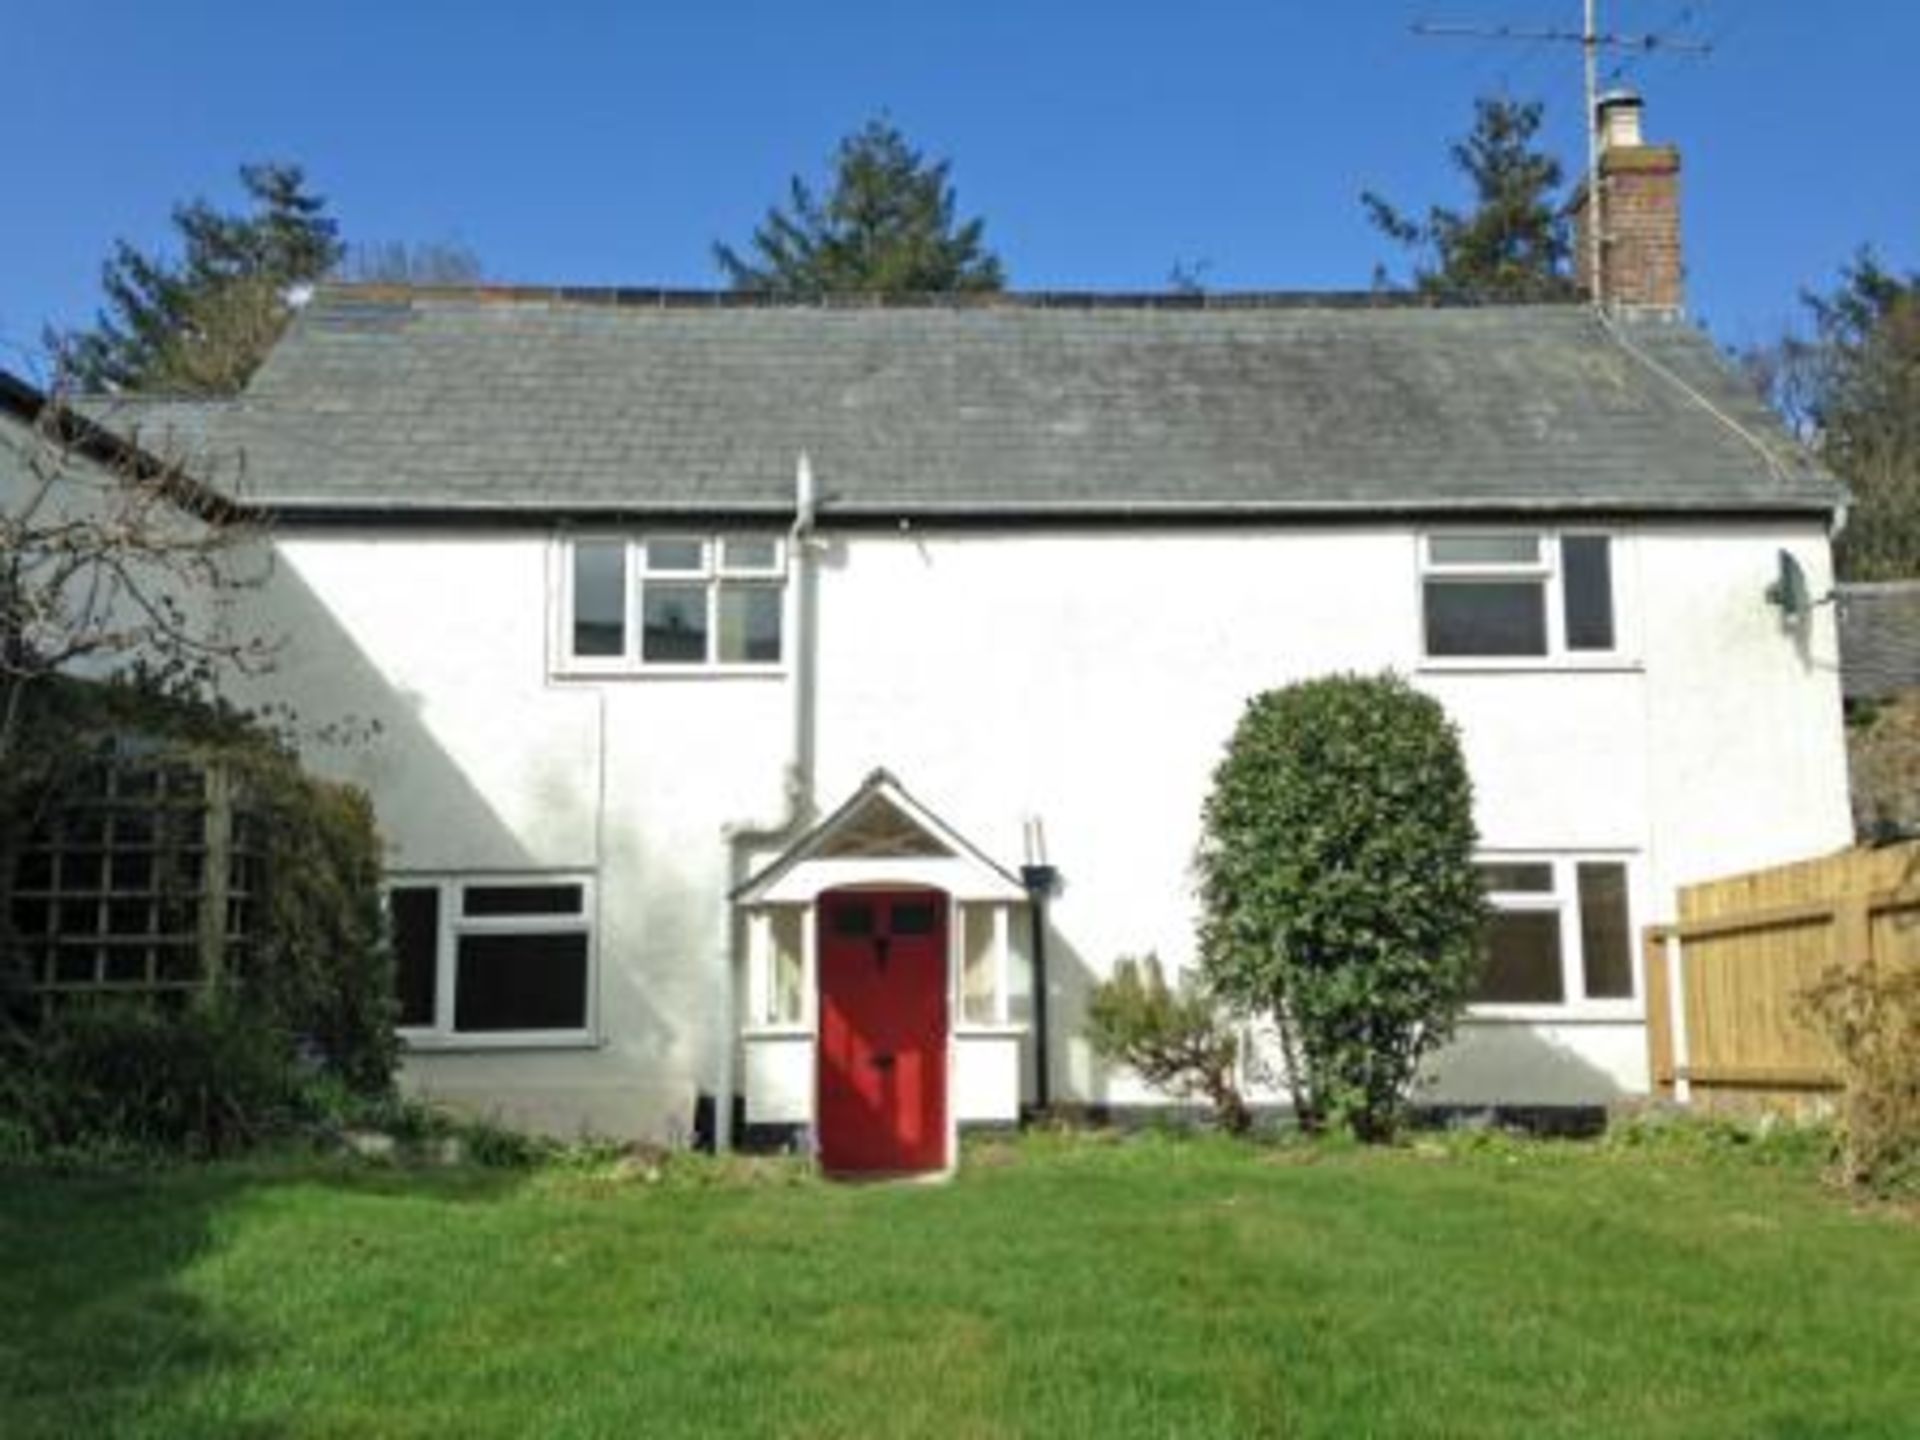 EAST DEVON - CHARACTER HOUSE FOR IMPROVEMENT IN FAVOURED VILLAGE